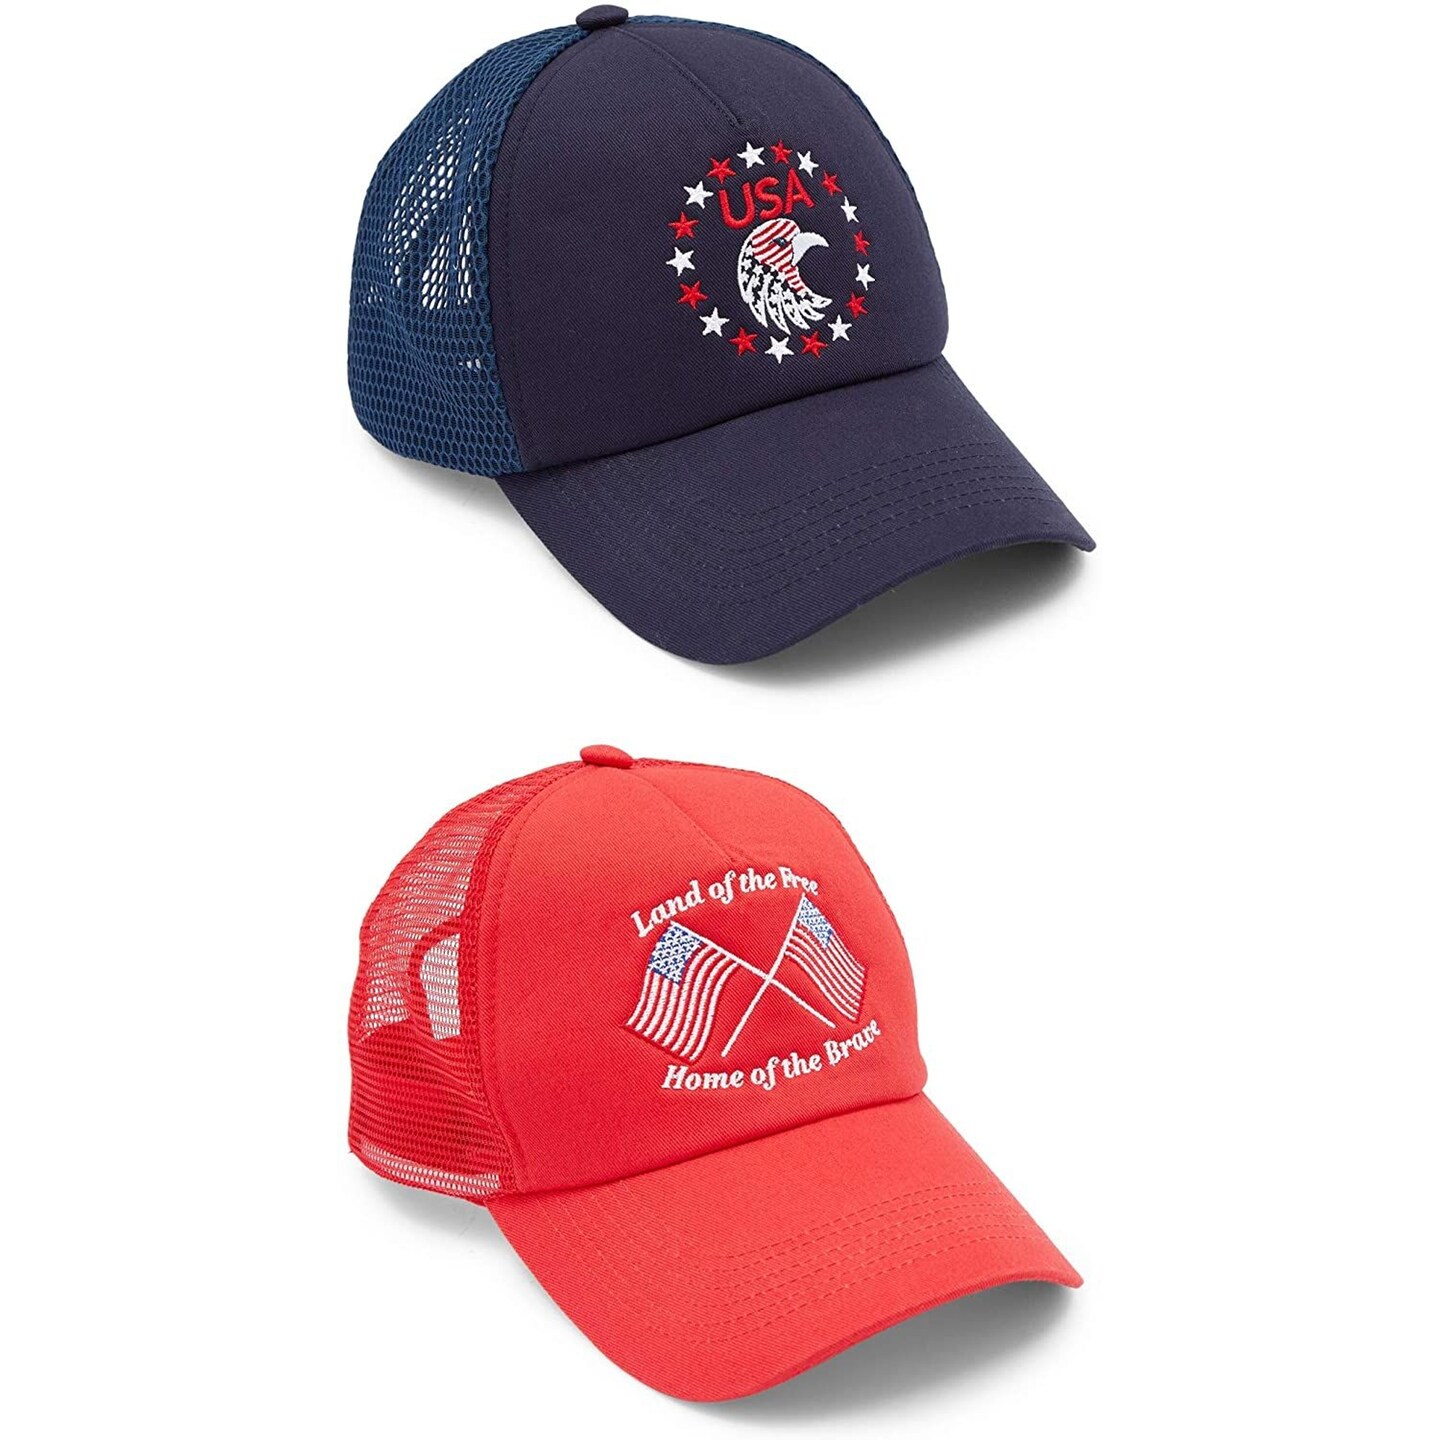 Patriotic Trucker Hats for Men, American Flag, Eagle (One Size, 2